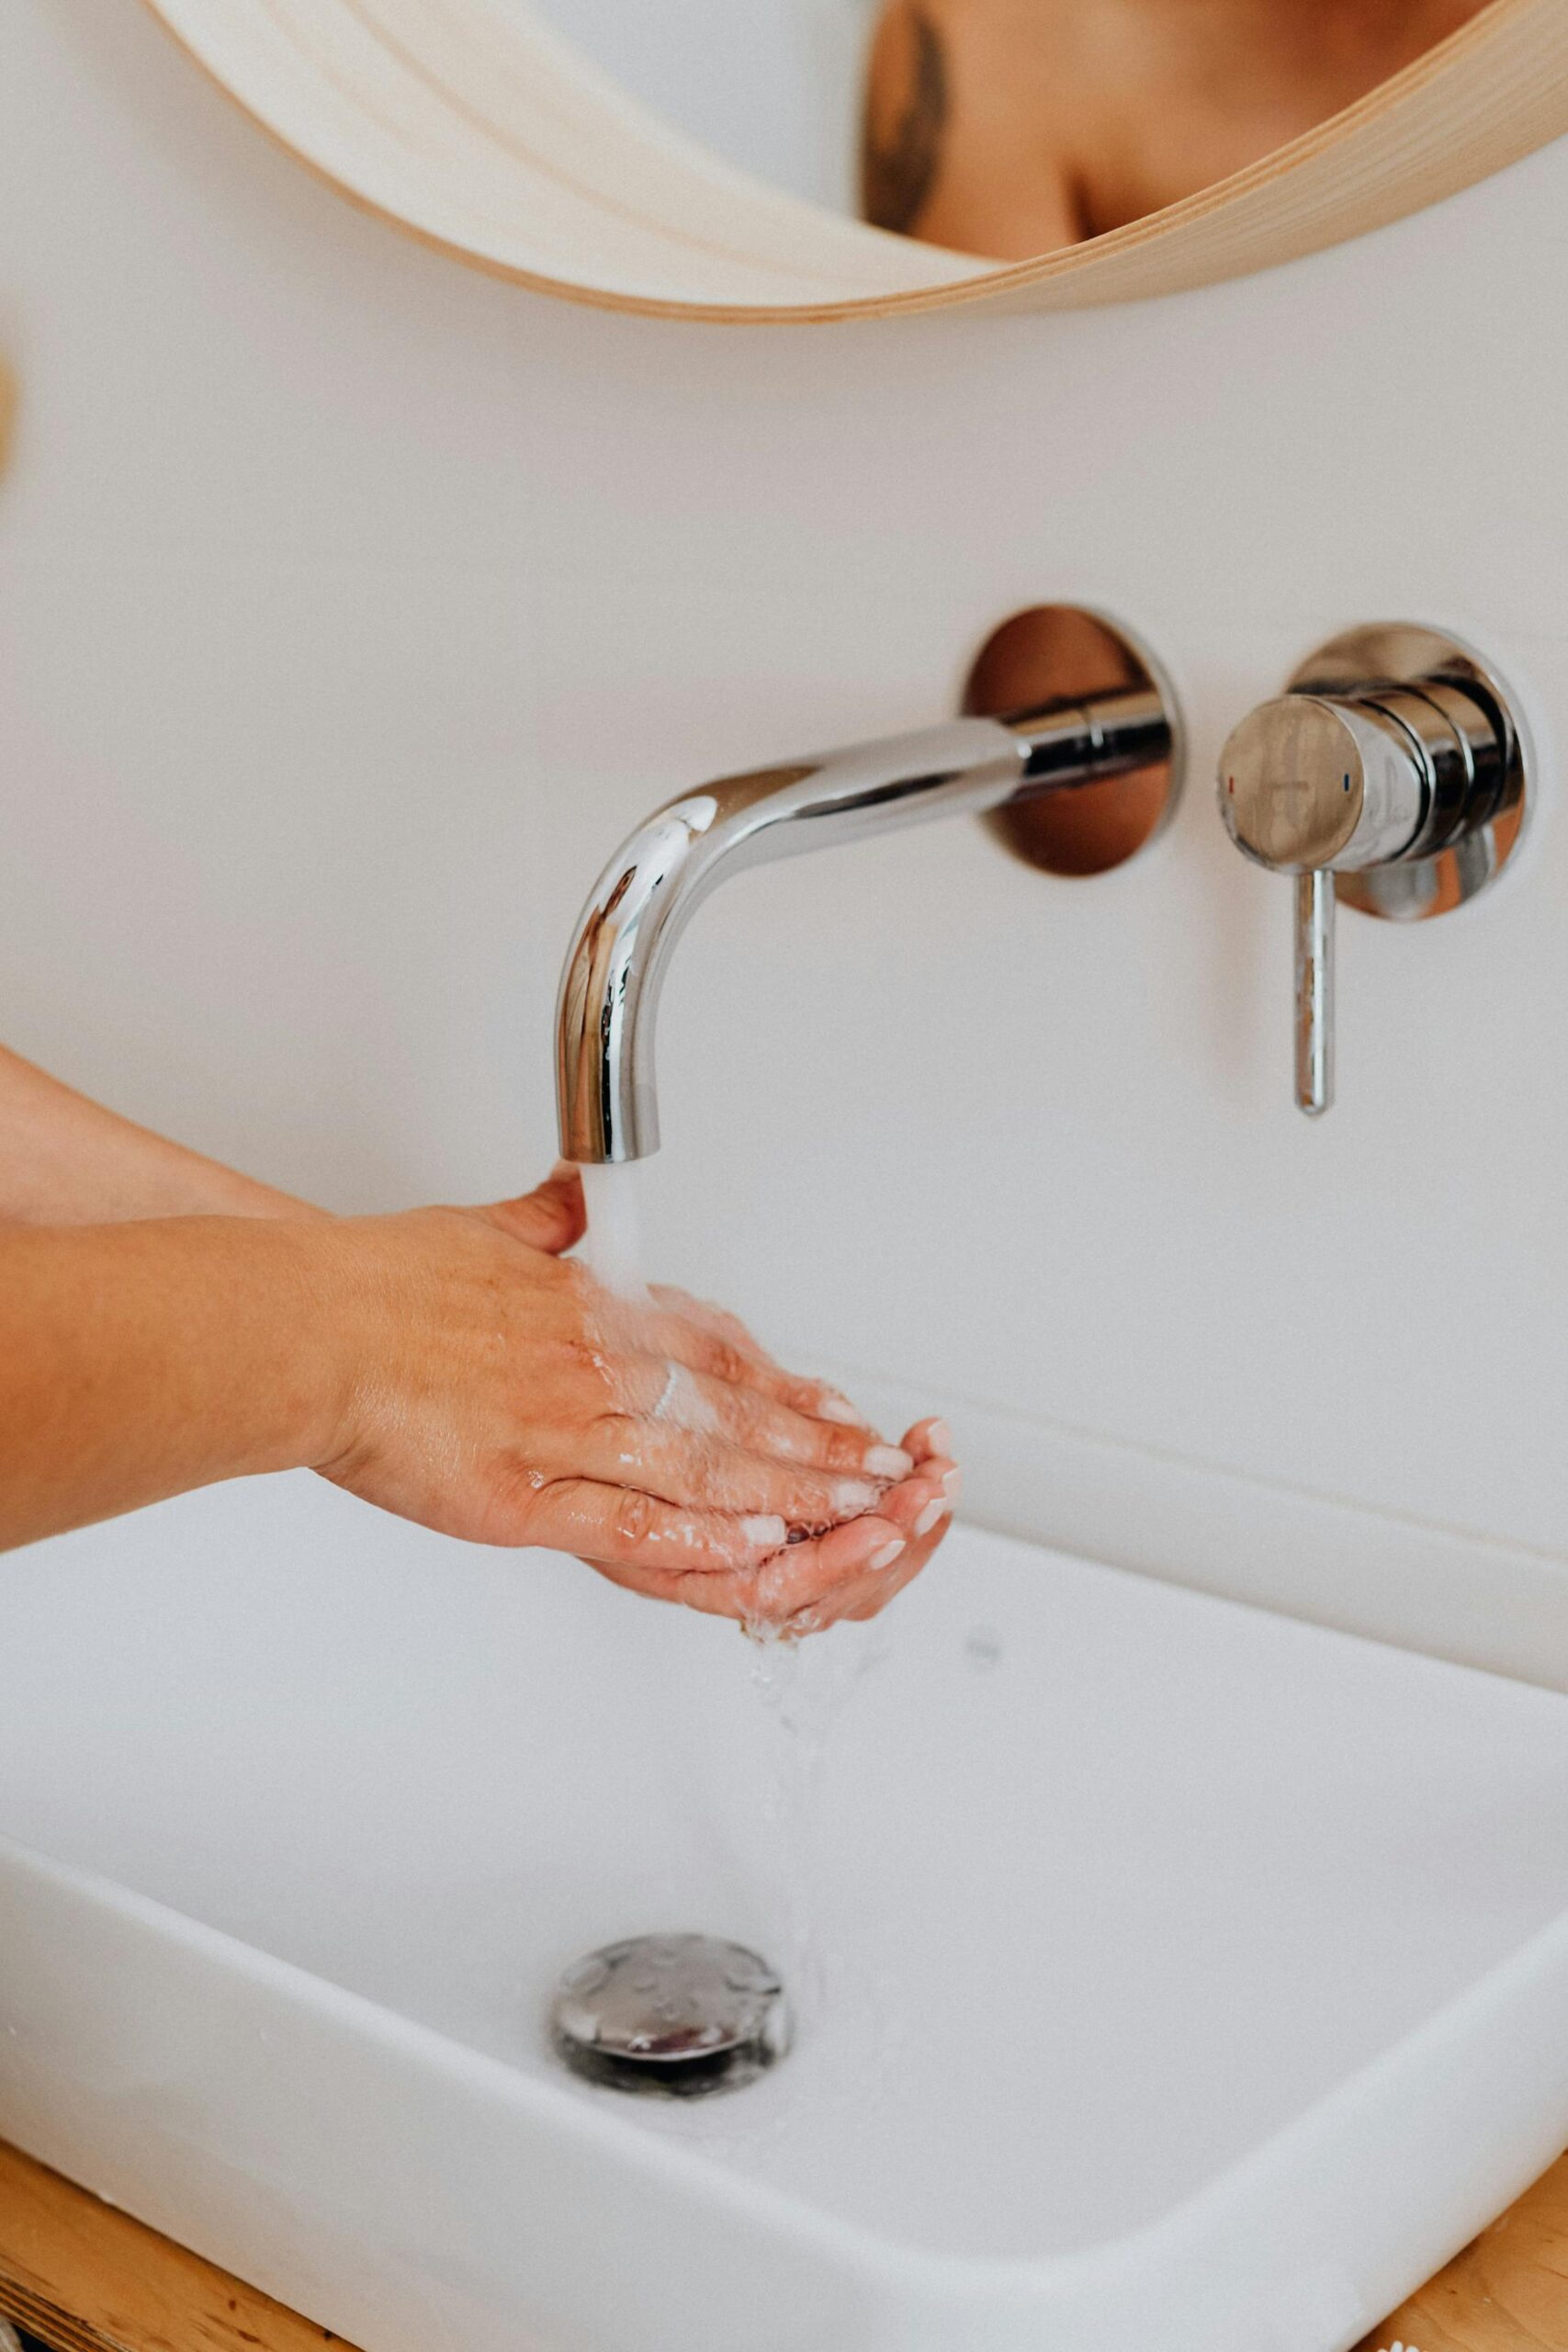 4 Common Plumbing Problems To Watch Out For